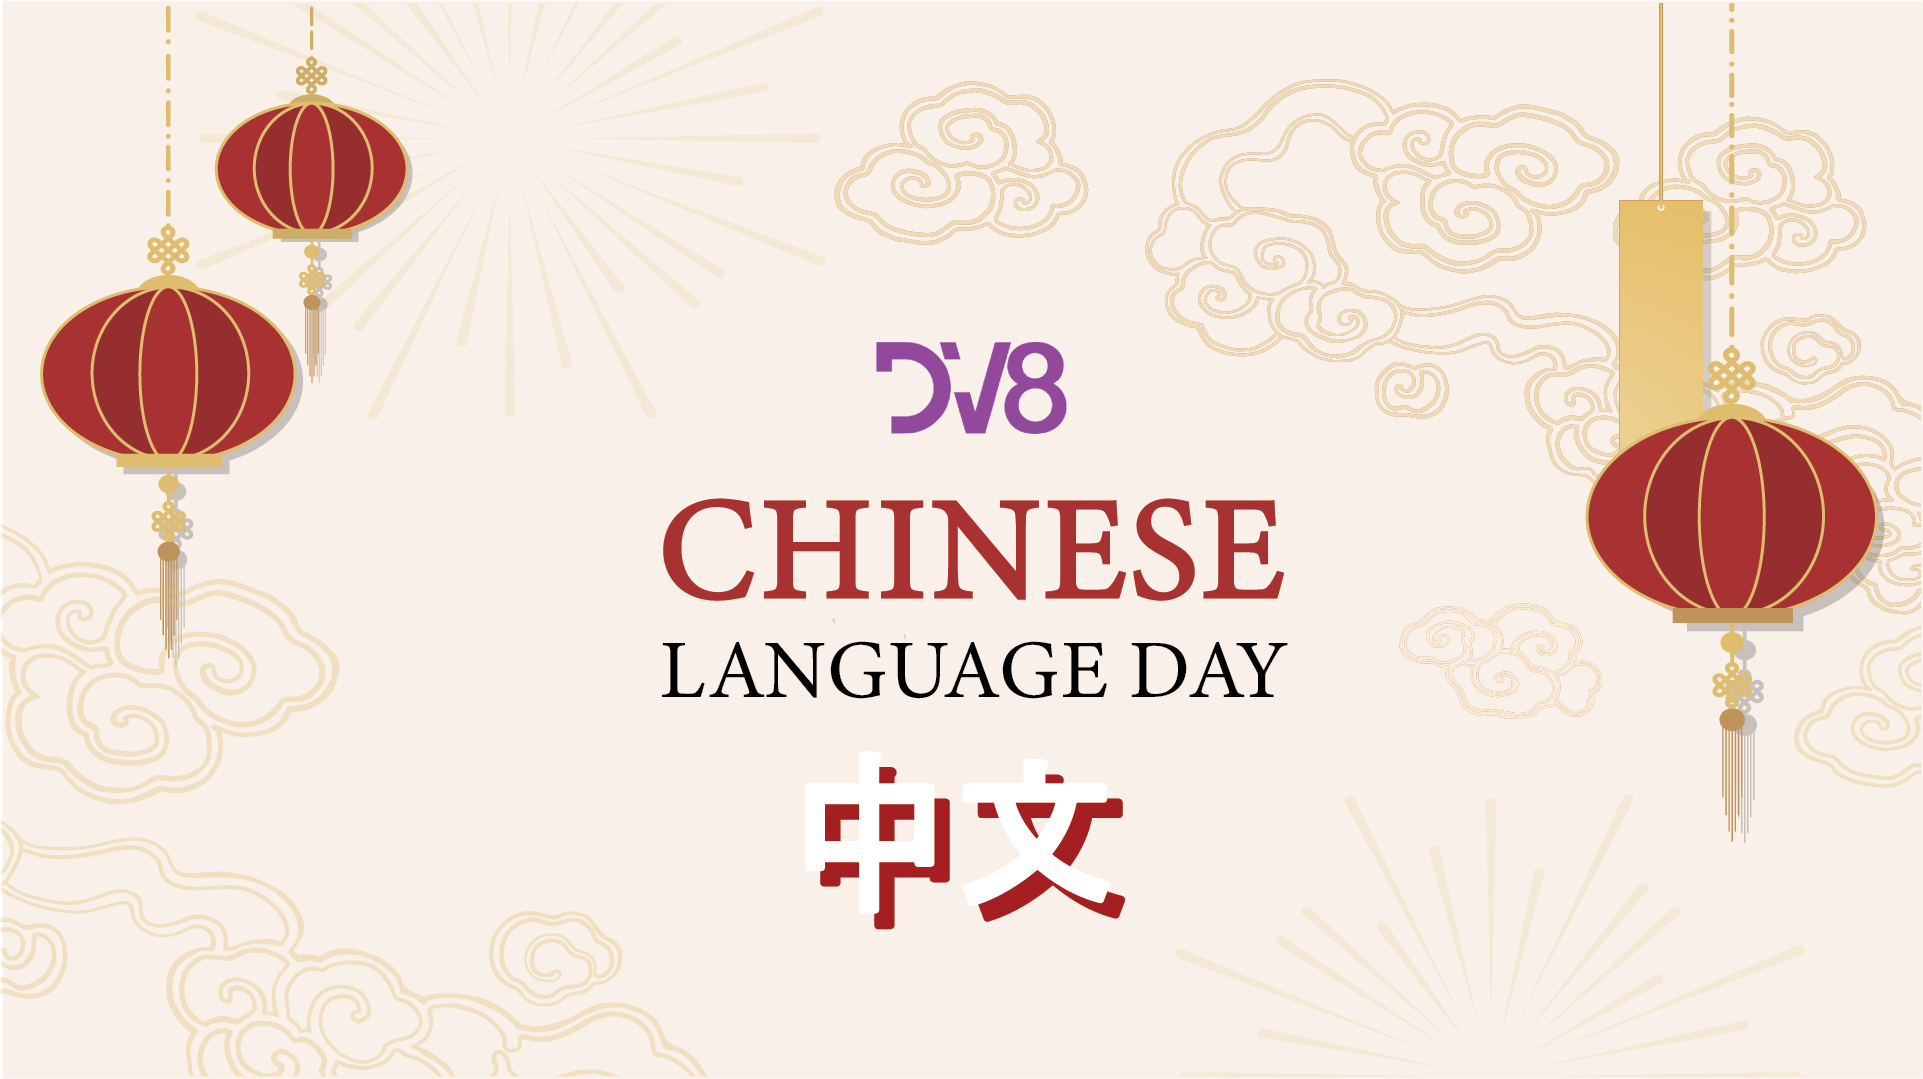 Chinese Language Day: 4 Amazing Facts About the Chinese Language You Probably Didn’t Know￼